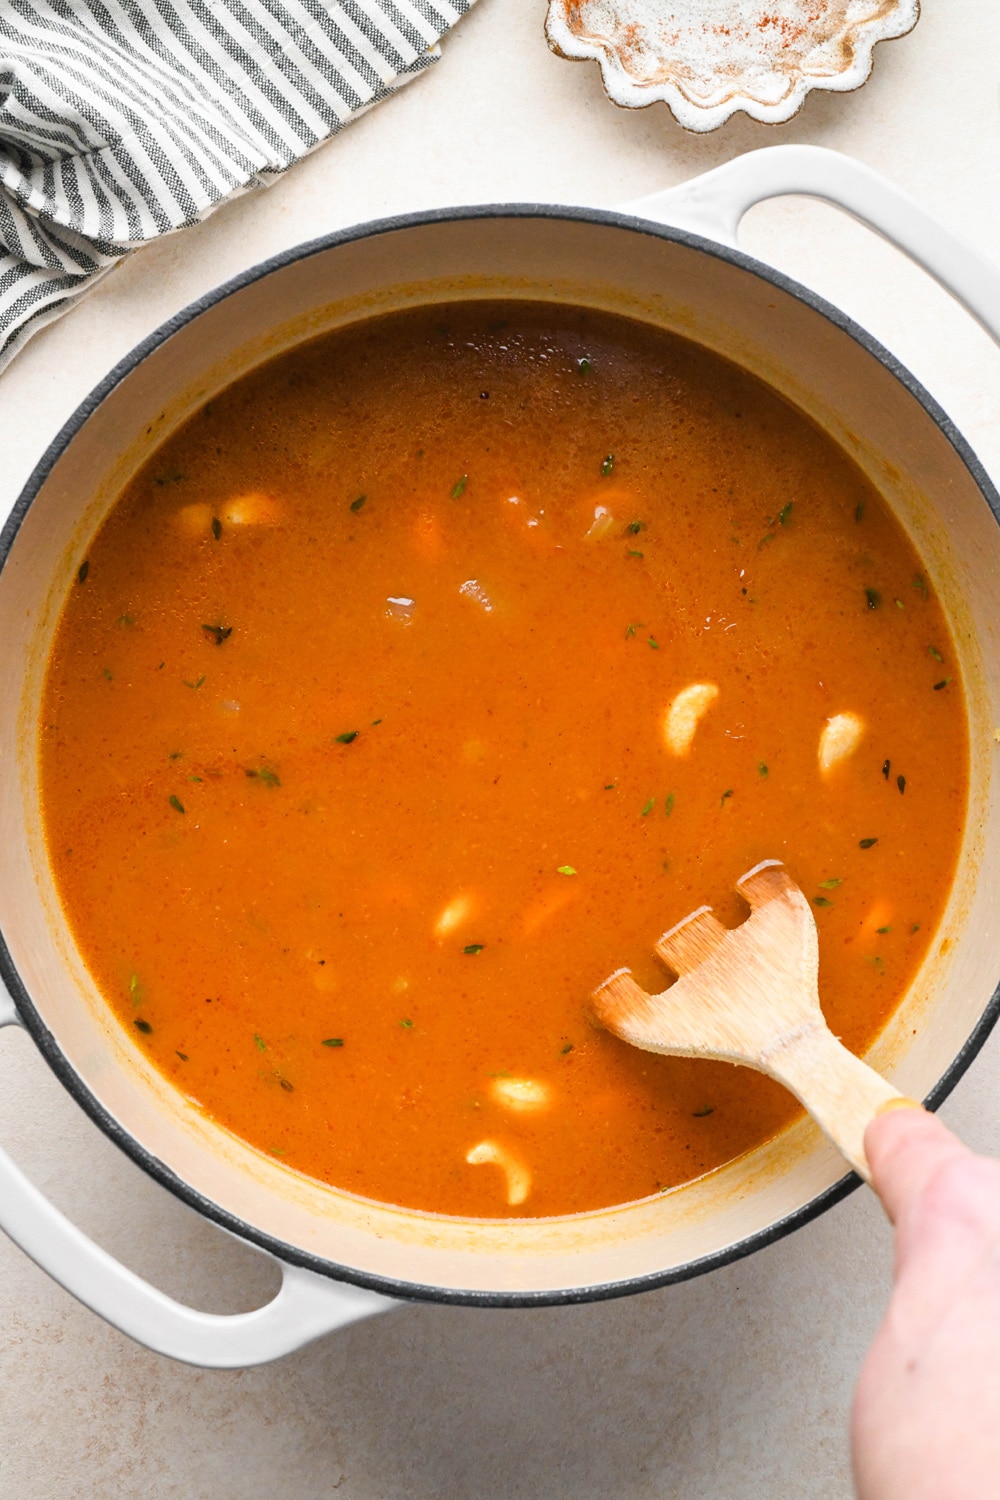 How to make Dairy Free Pumpkin Carrot Soup: Mixing the pumpkin puree, cashews, and vegetable broth together in the soup pot.